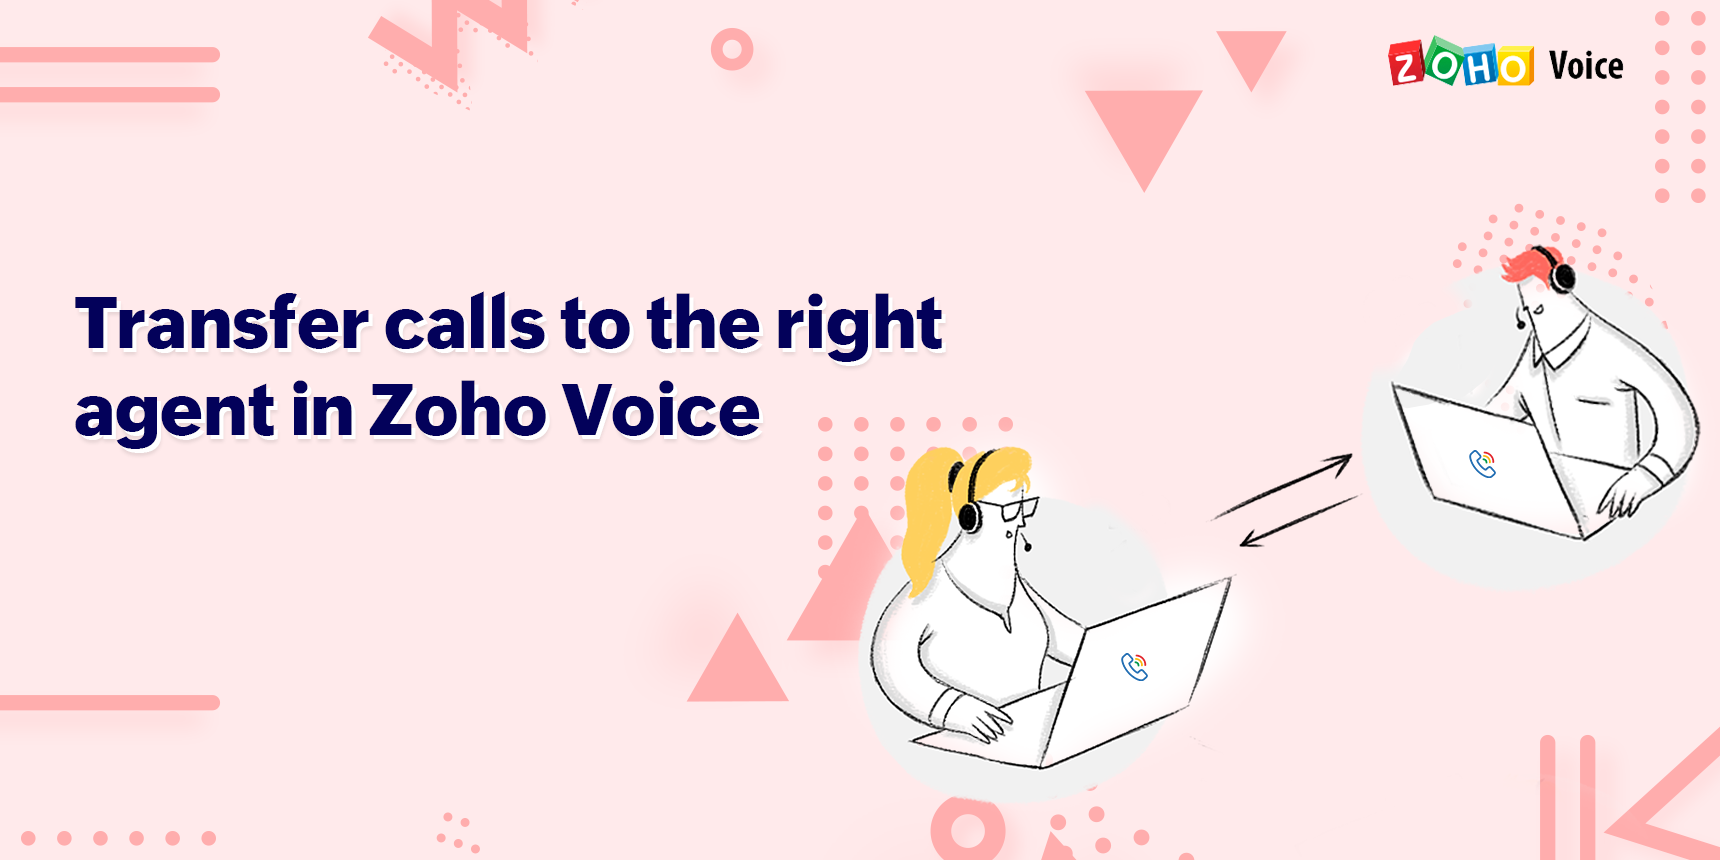 Transfer calls to the right agent in Zoho Voice